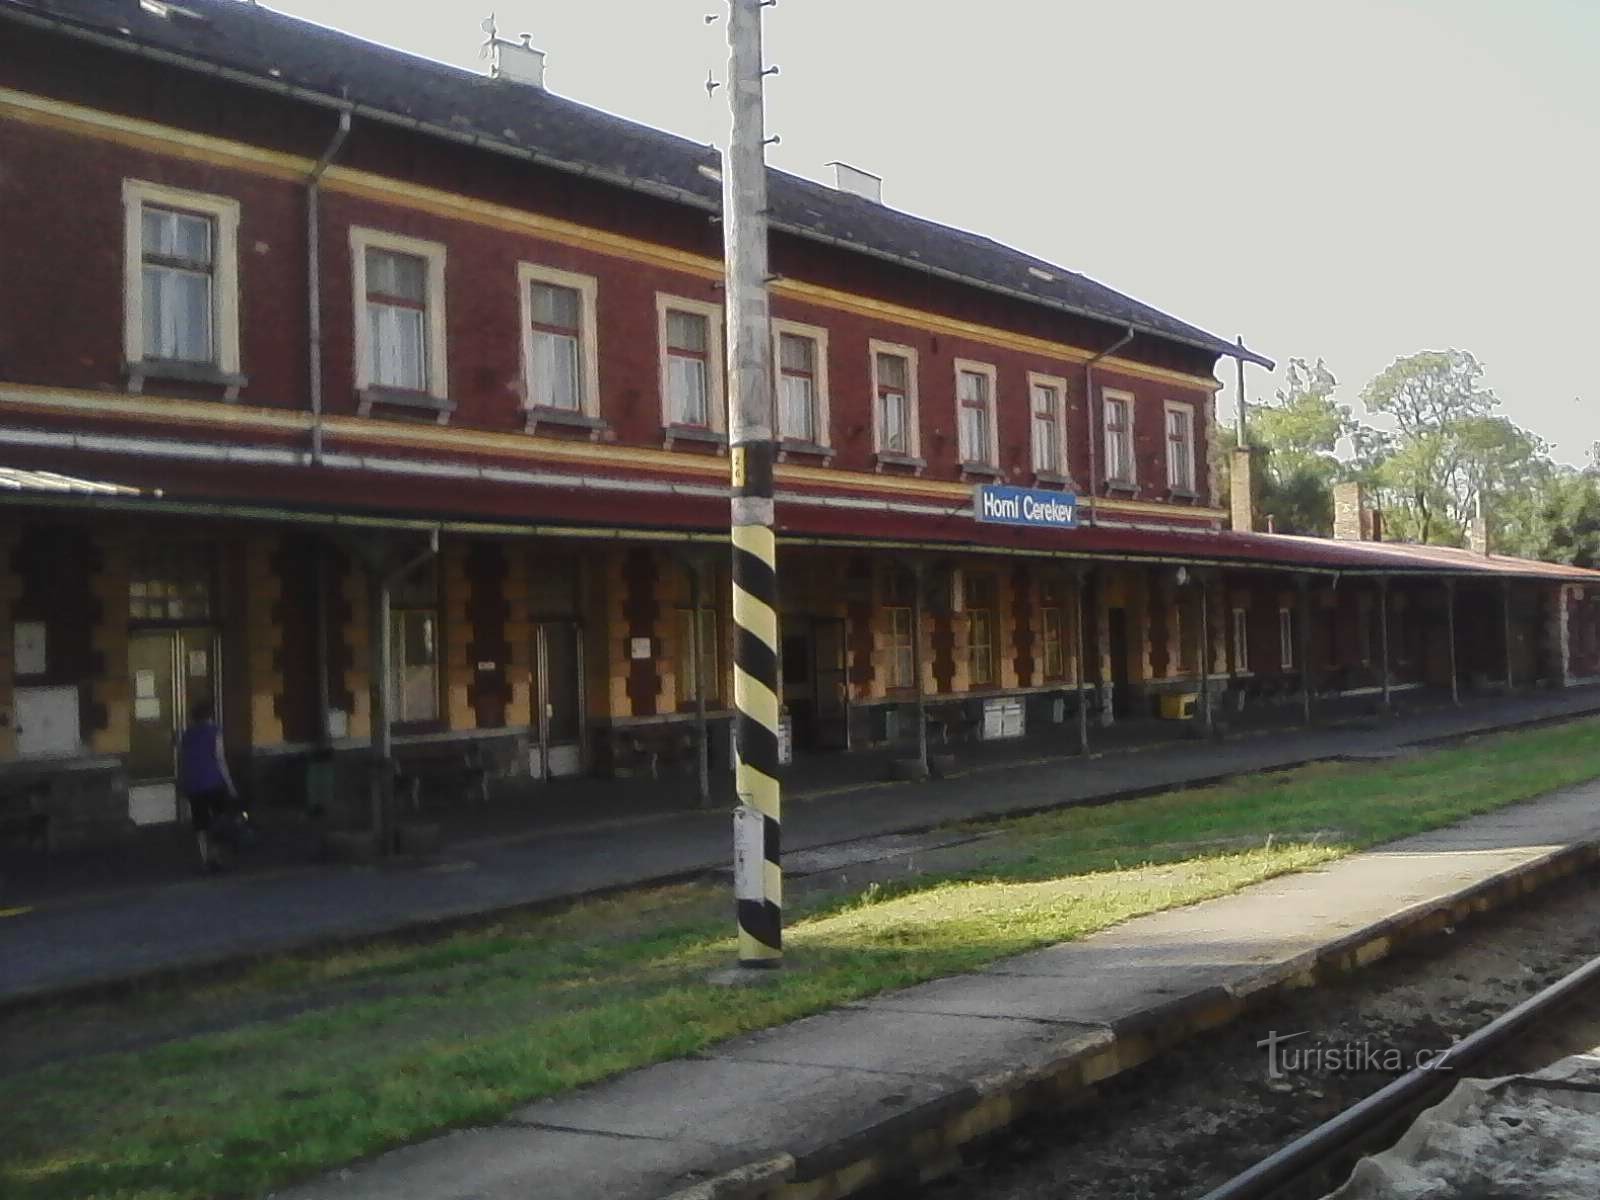 1. Arrival at the railway station in Horní Cerekva, which closes the line from Tábor.